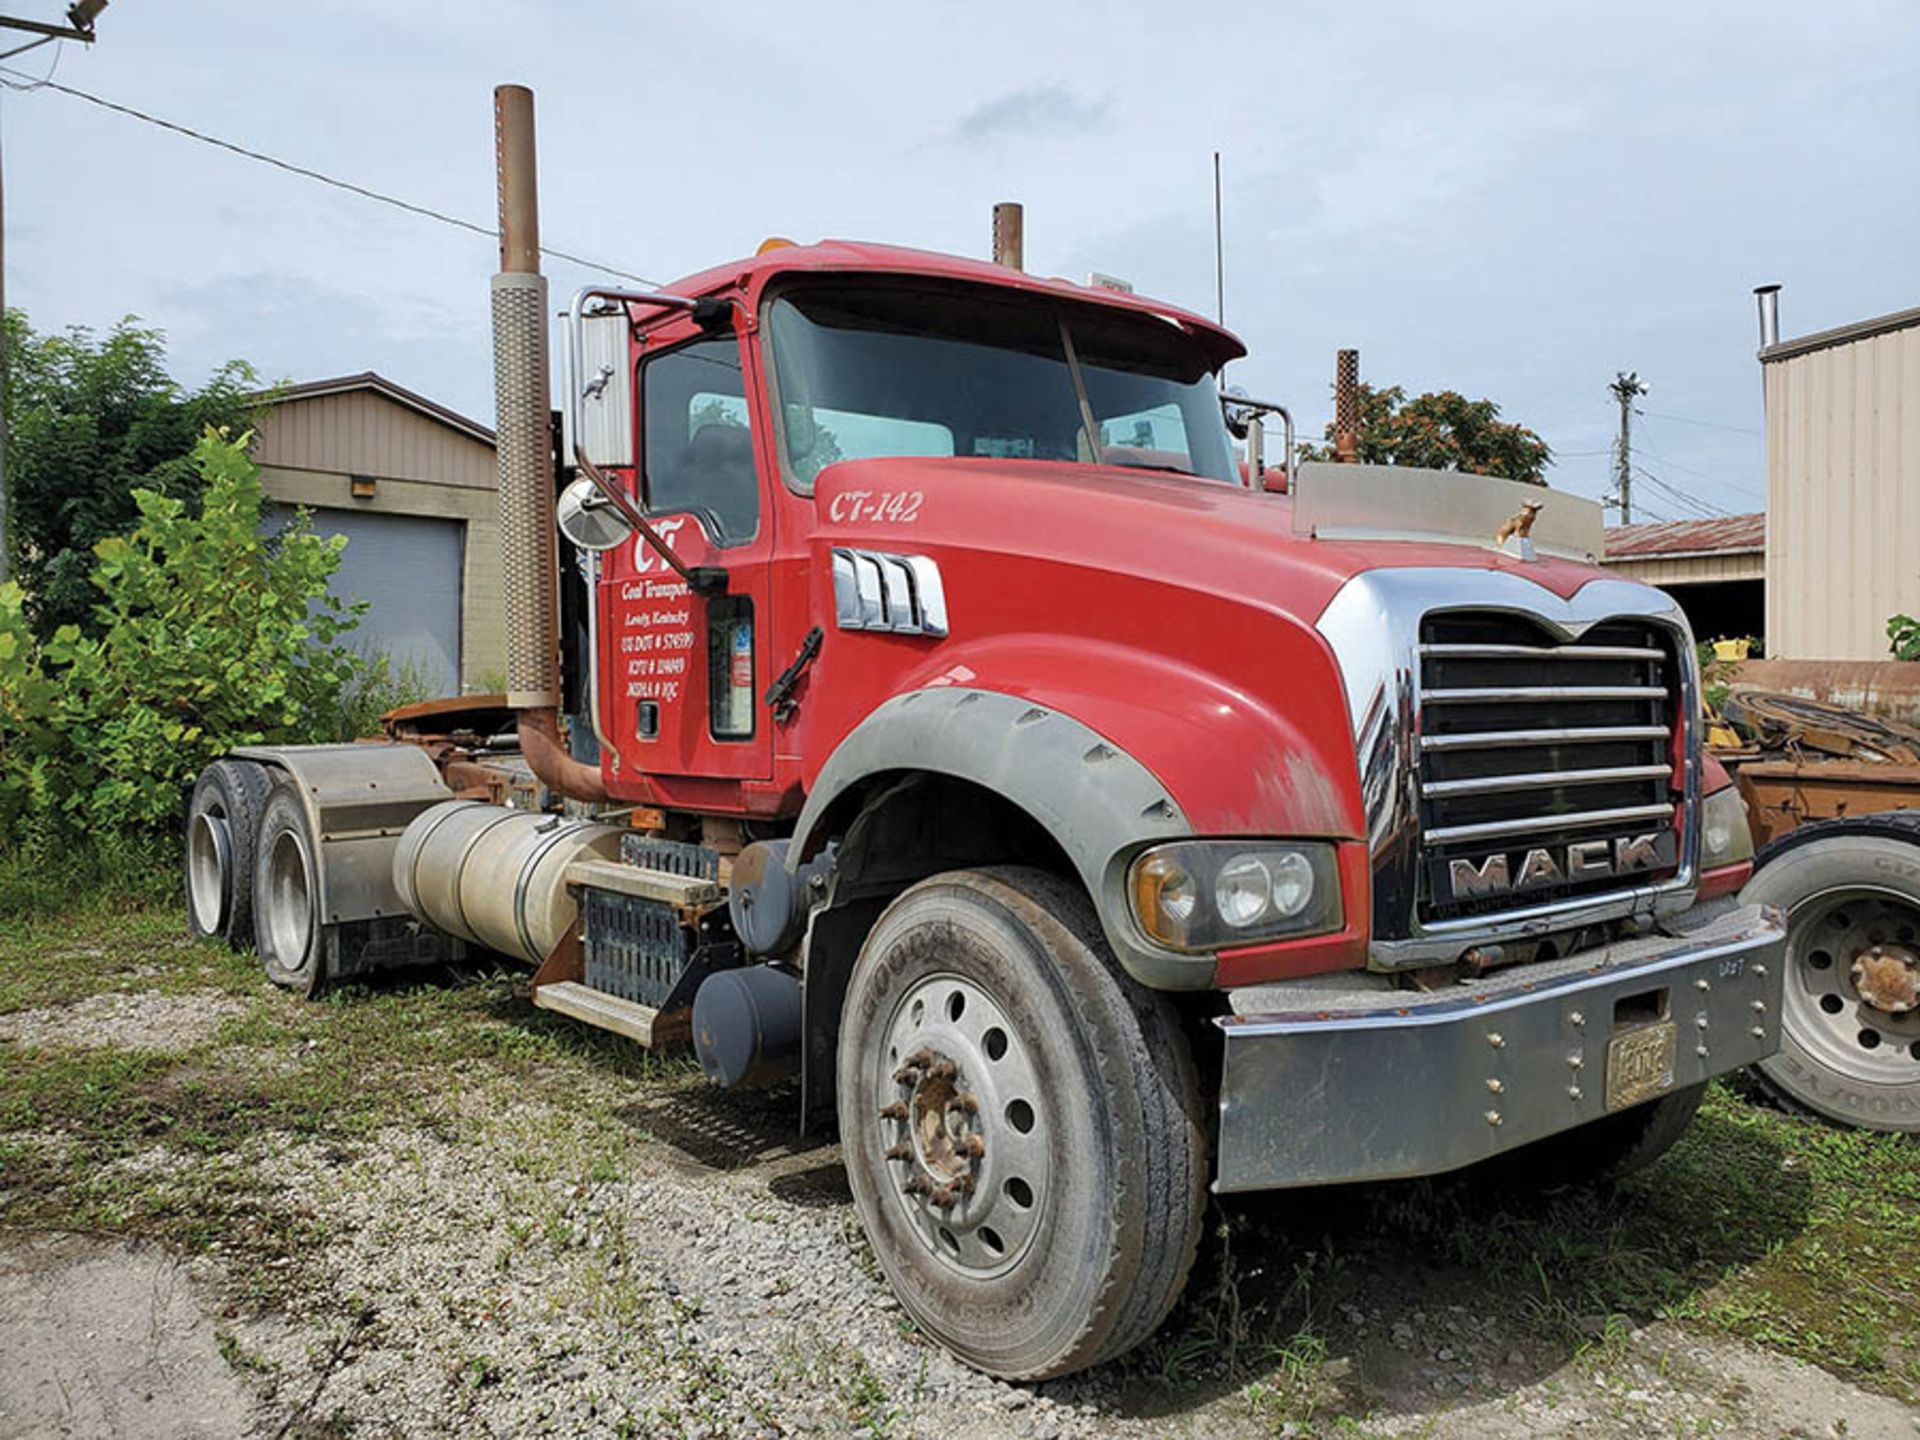 2009 MACK GU713 T/A DAY CAB TRACTOR, MAXITORQUE 18 SPEED TRANS., WET LINES MACK INLINE SIX DIESEL - Image 4 of 11